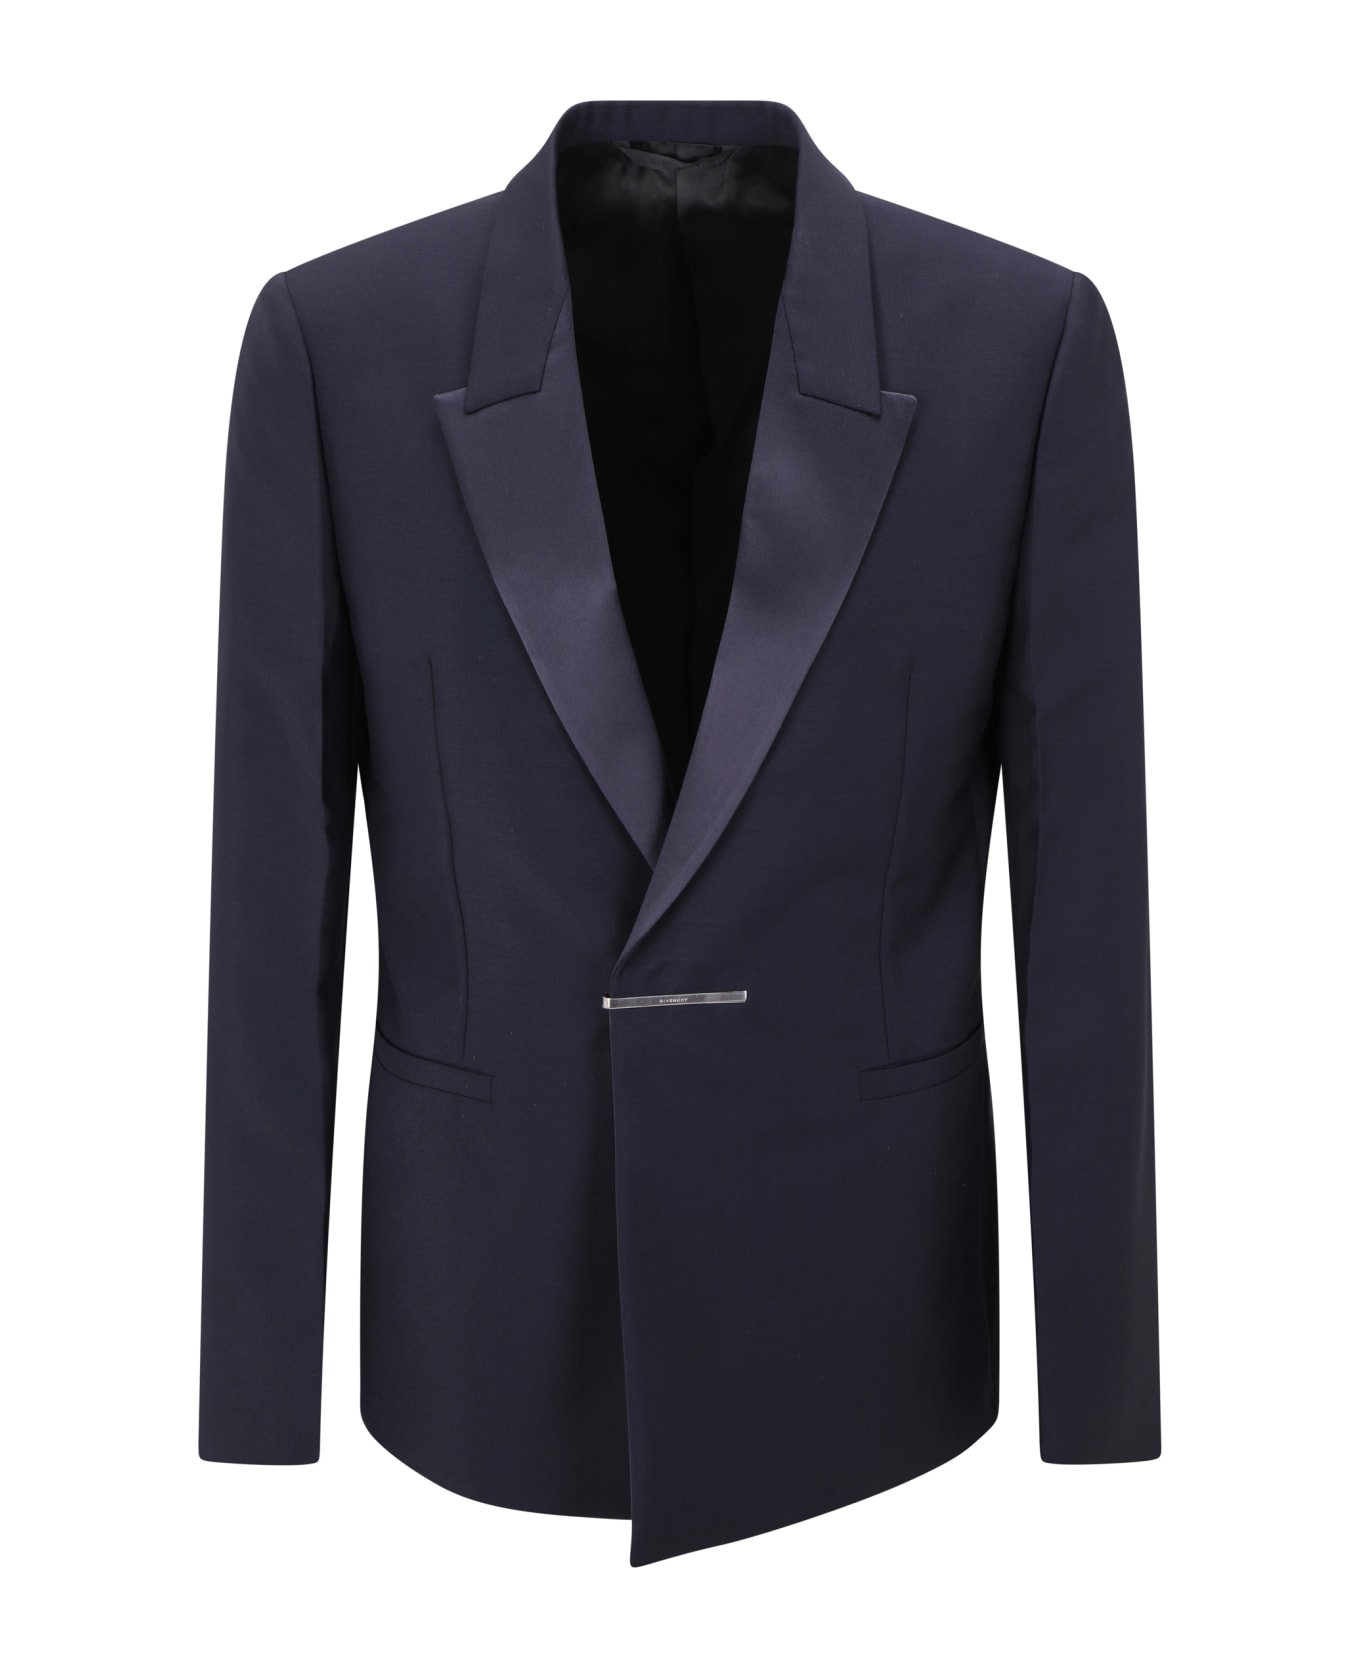 Givenchy Wool Blend Single-breast Jacket - blue ブレザー